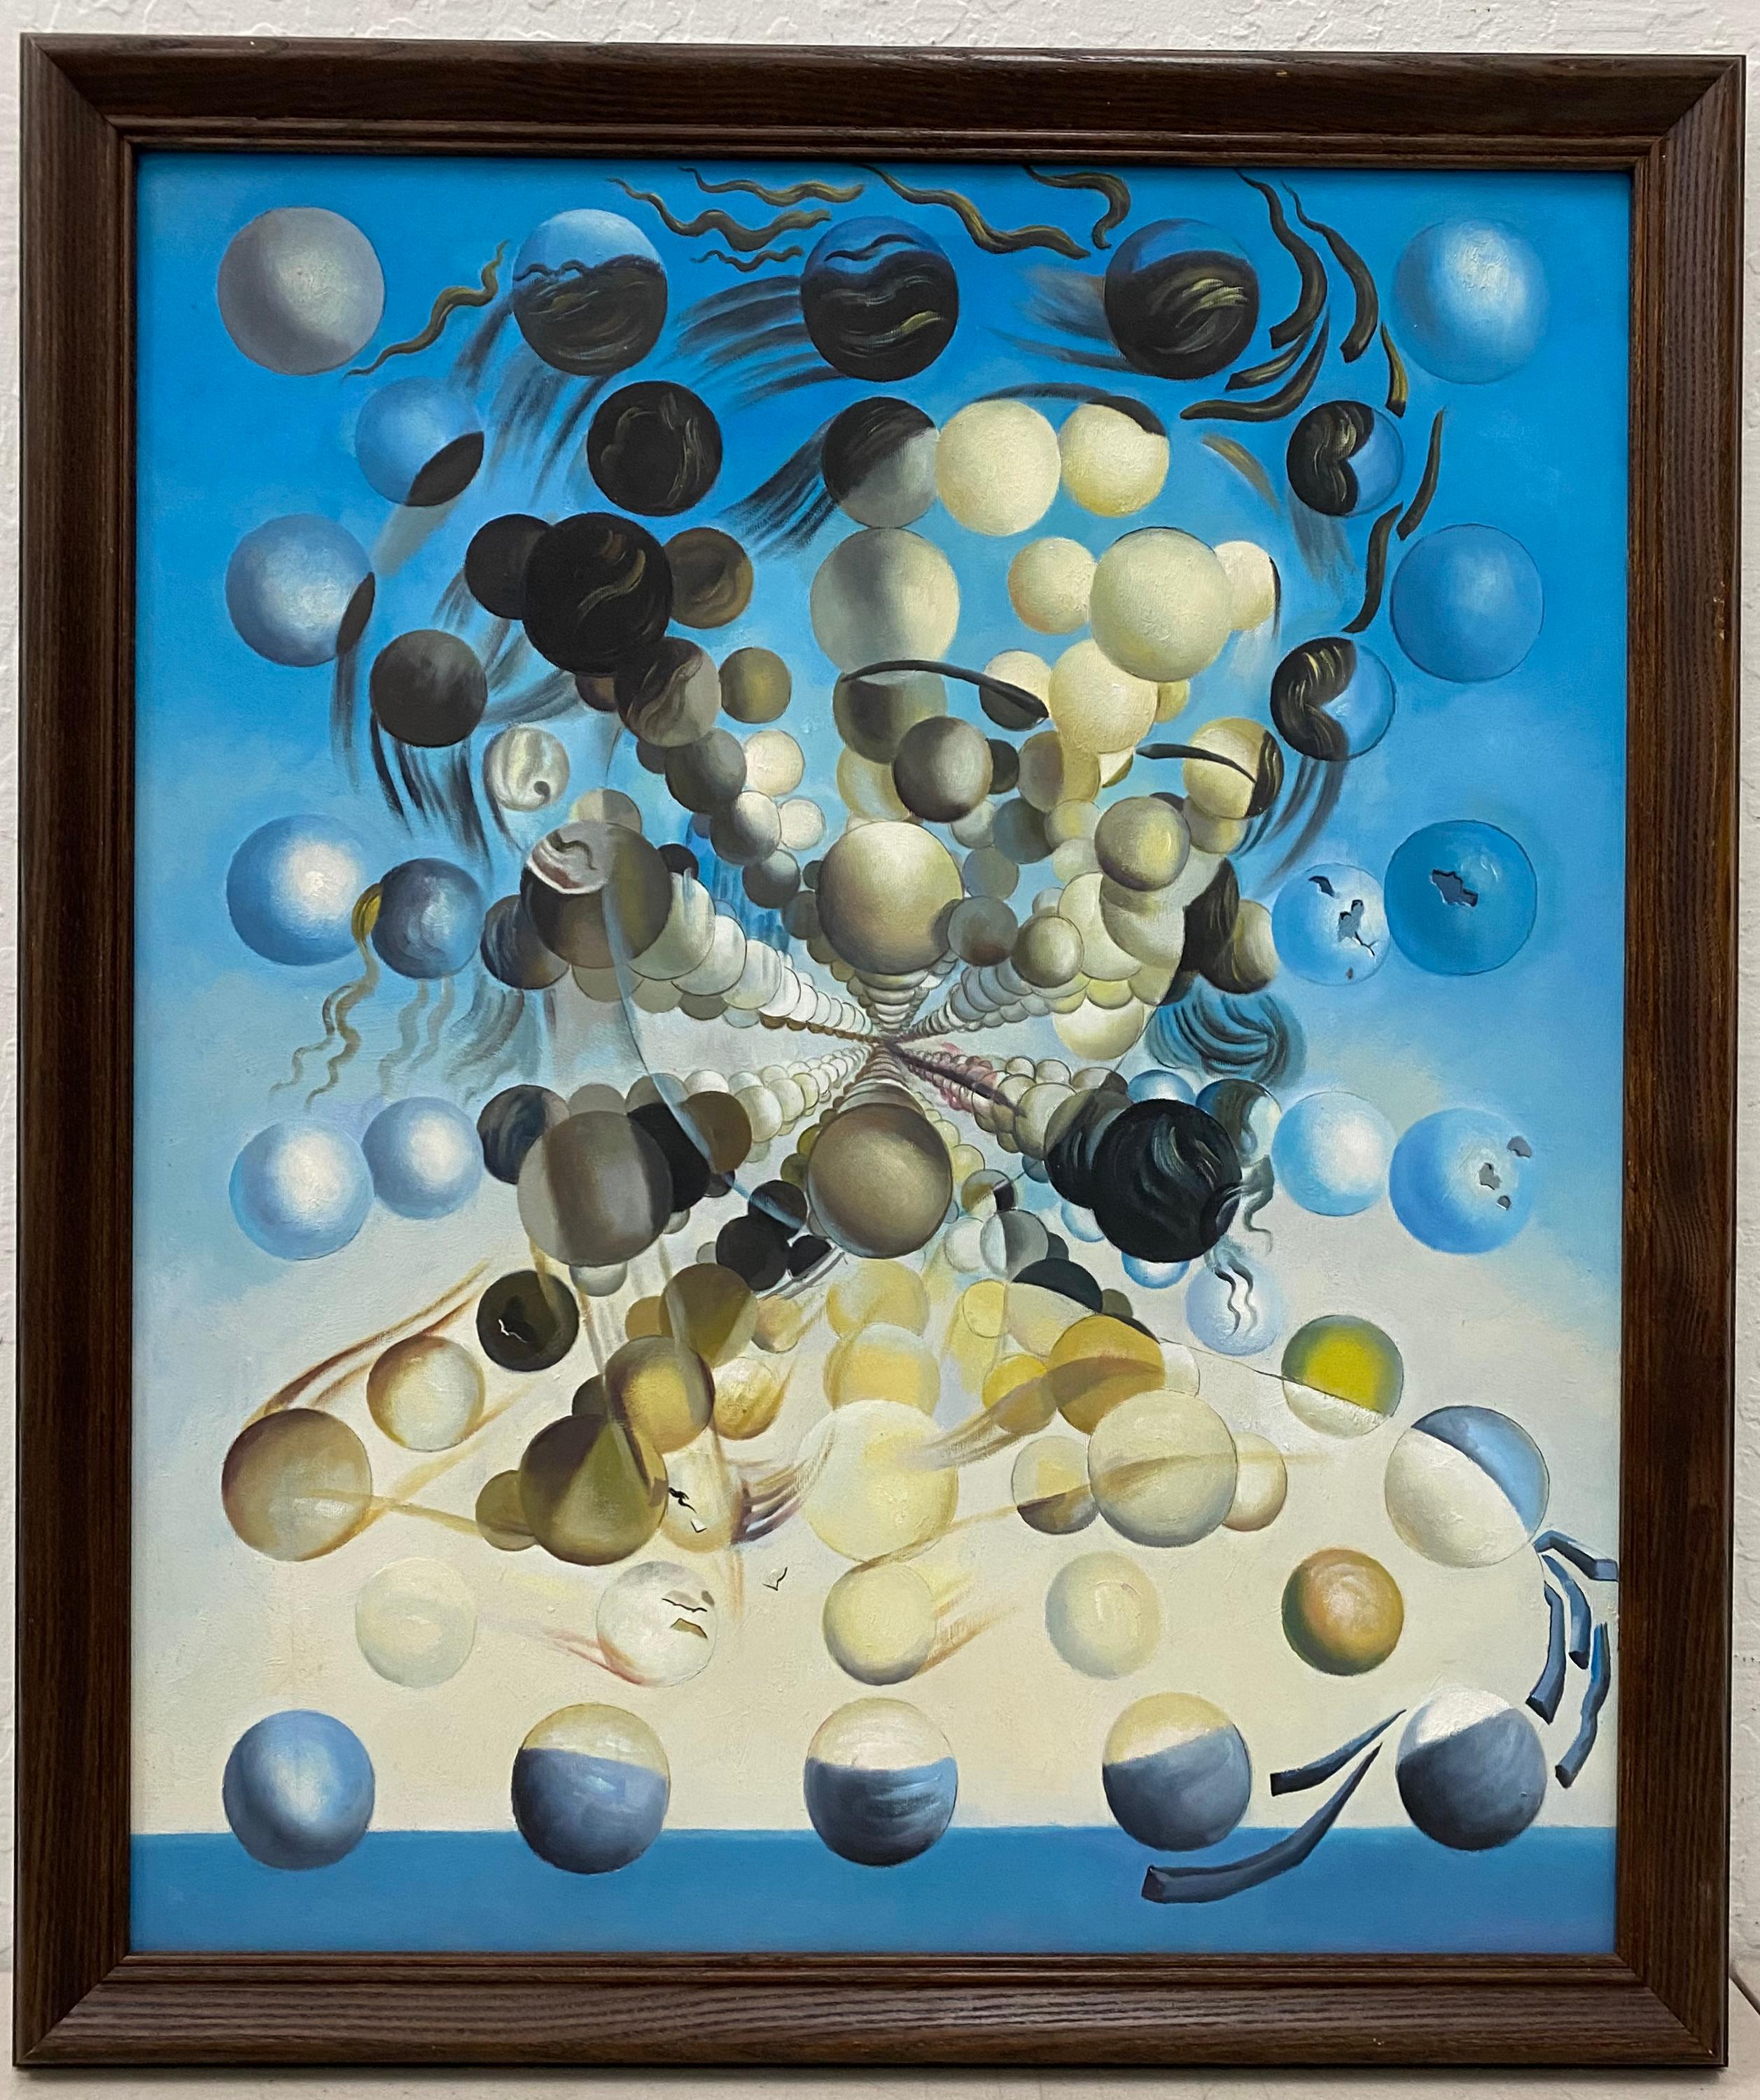 (after) Salvador Dali Portrait Painting - Contemporary Acrylic "Galatea of the Spheres" Painting After Dali 21st Century